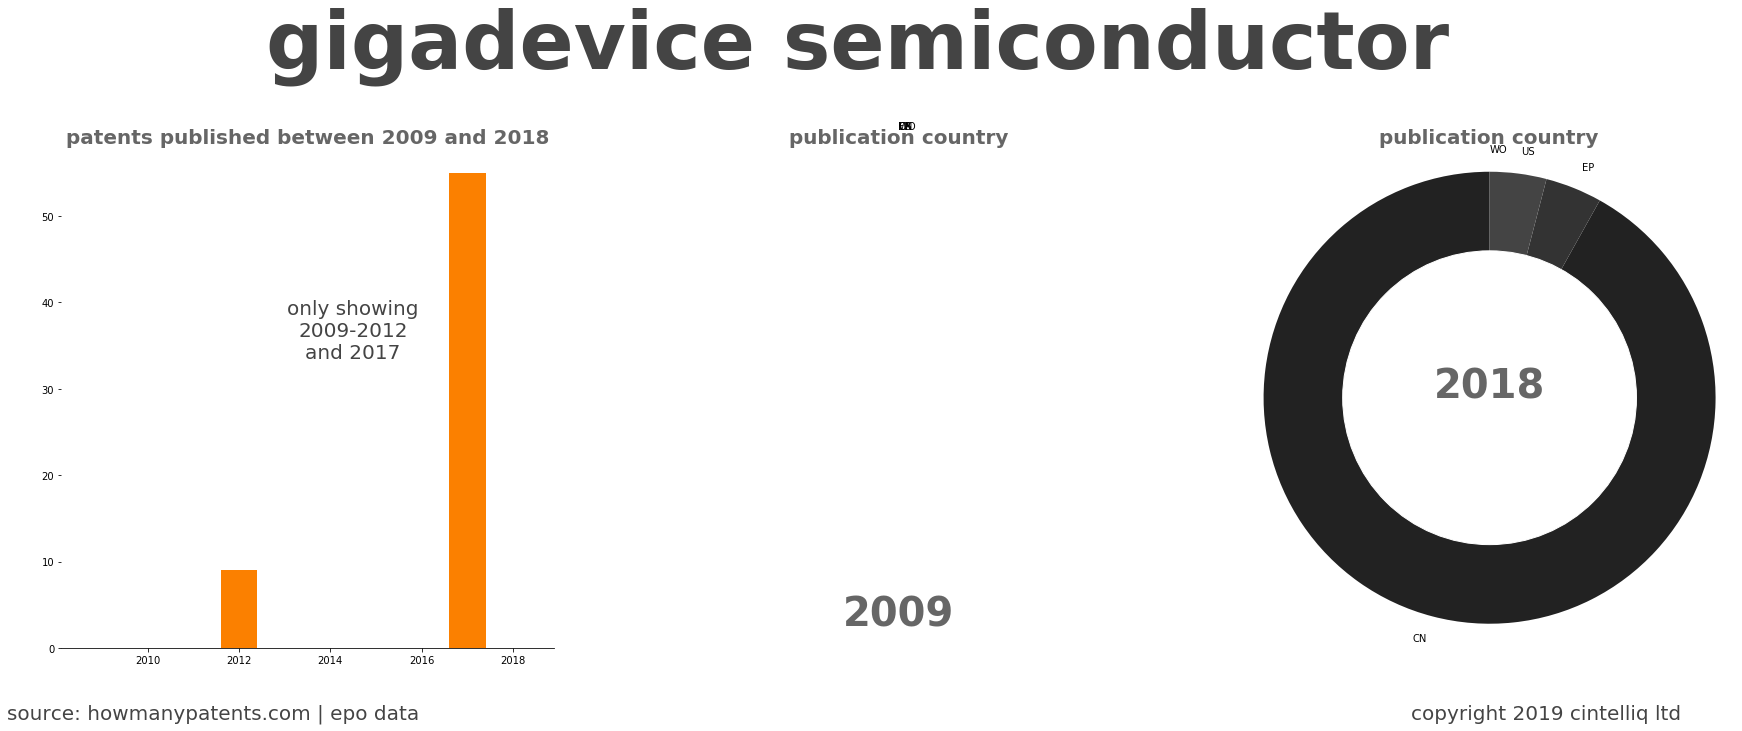 summary of patents for Gigadevice Semiconductor 